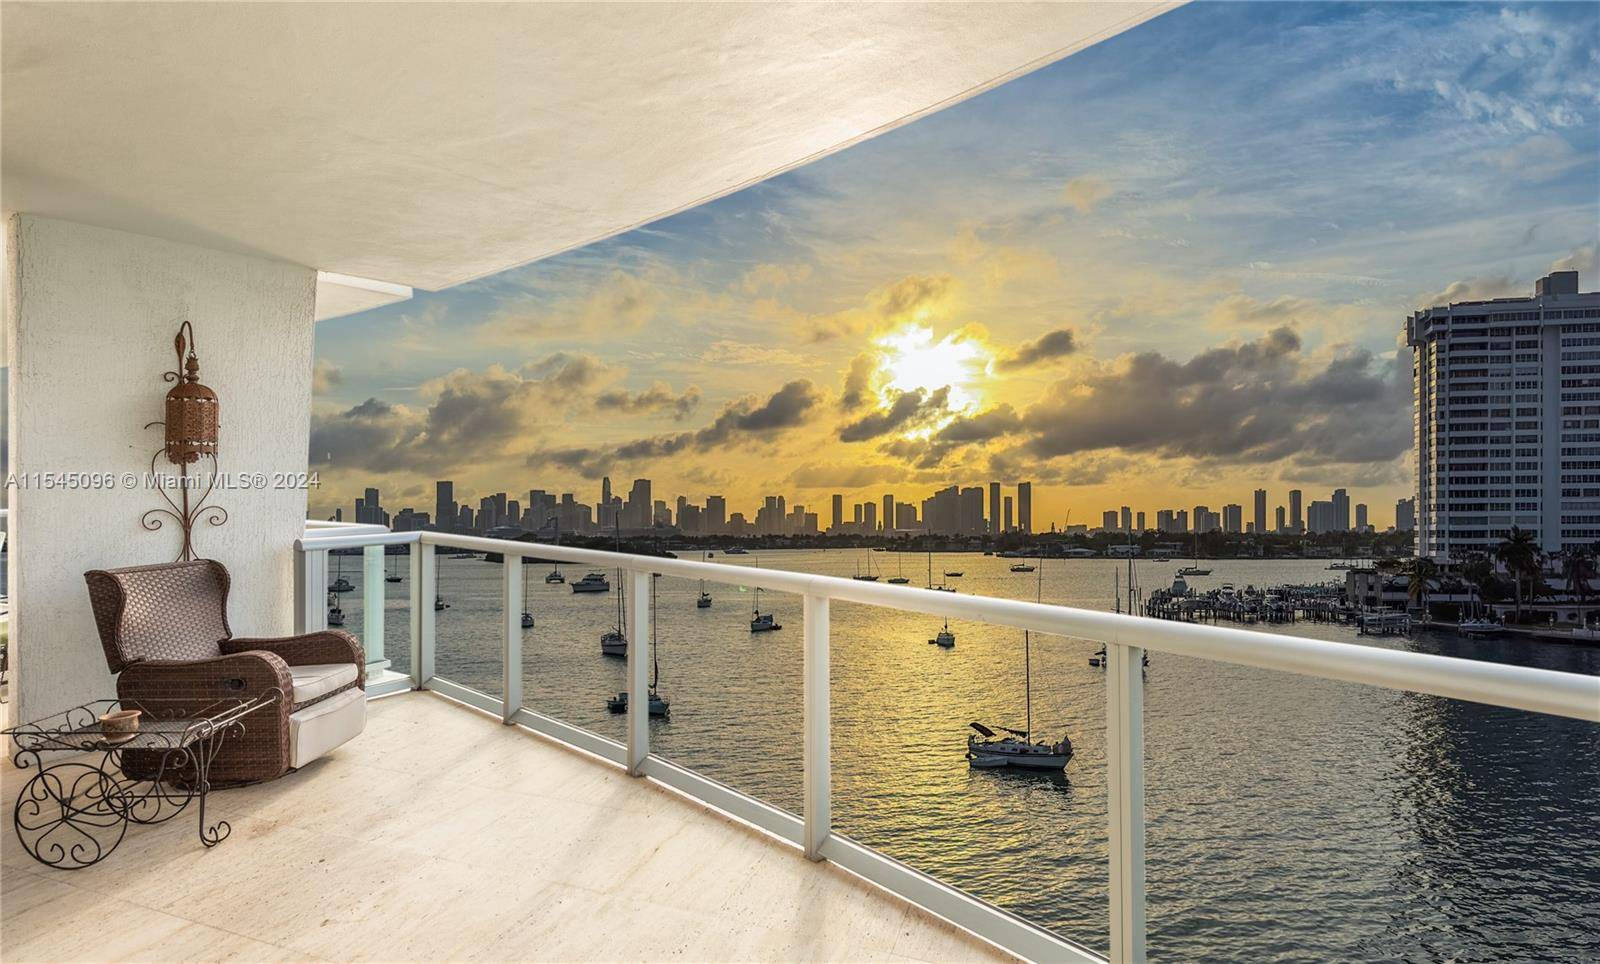 Escape into a world of secluded luxury in full floor sanctuary at Capri South Beach where magical views of Miami s skyline and glistening waters captivate your senses !